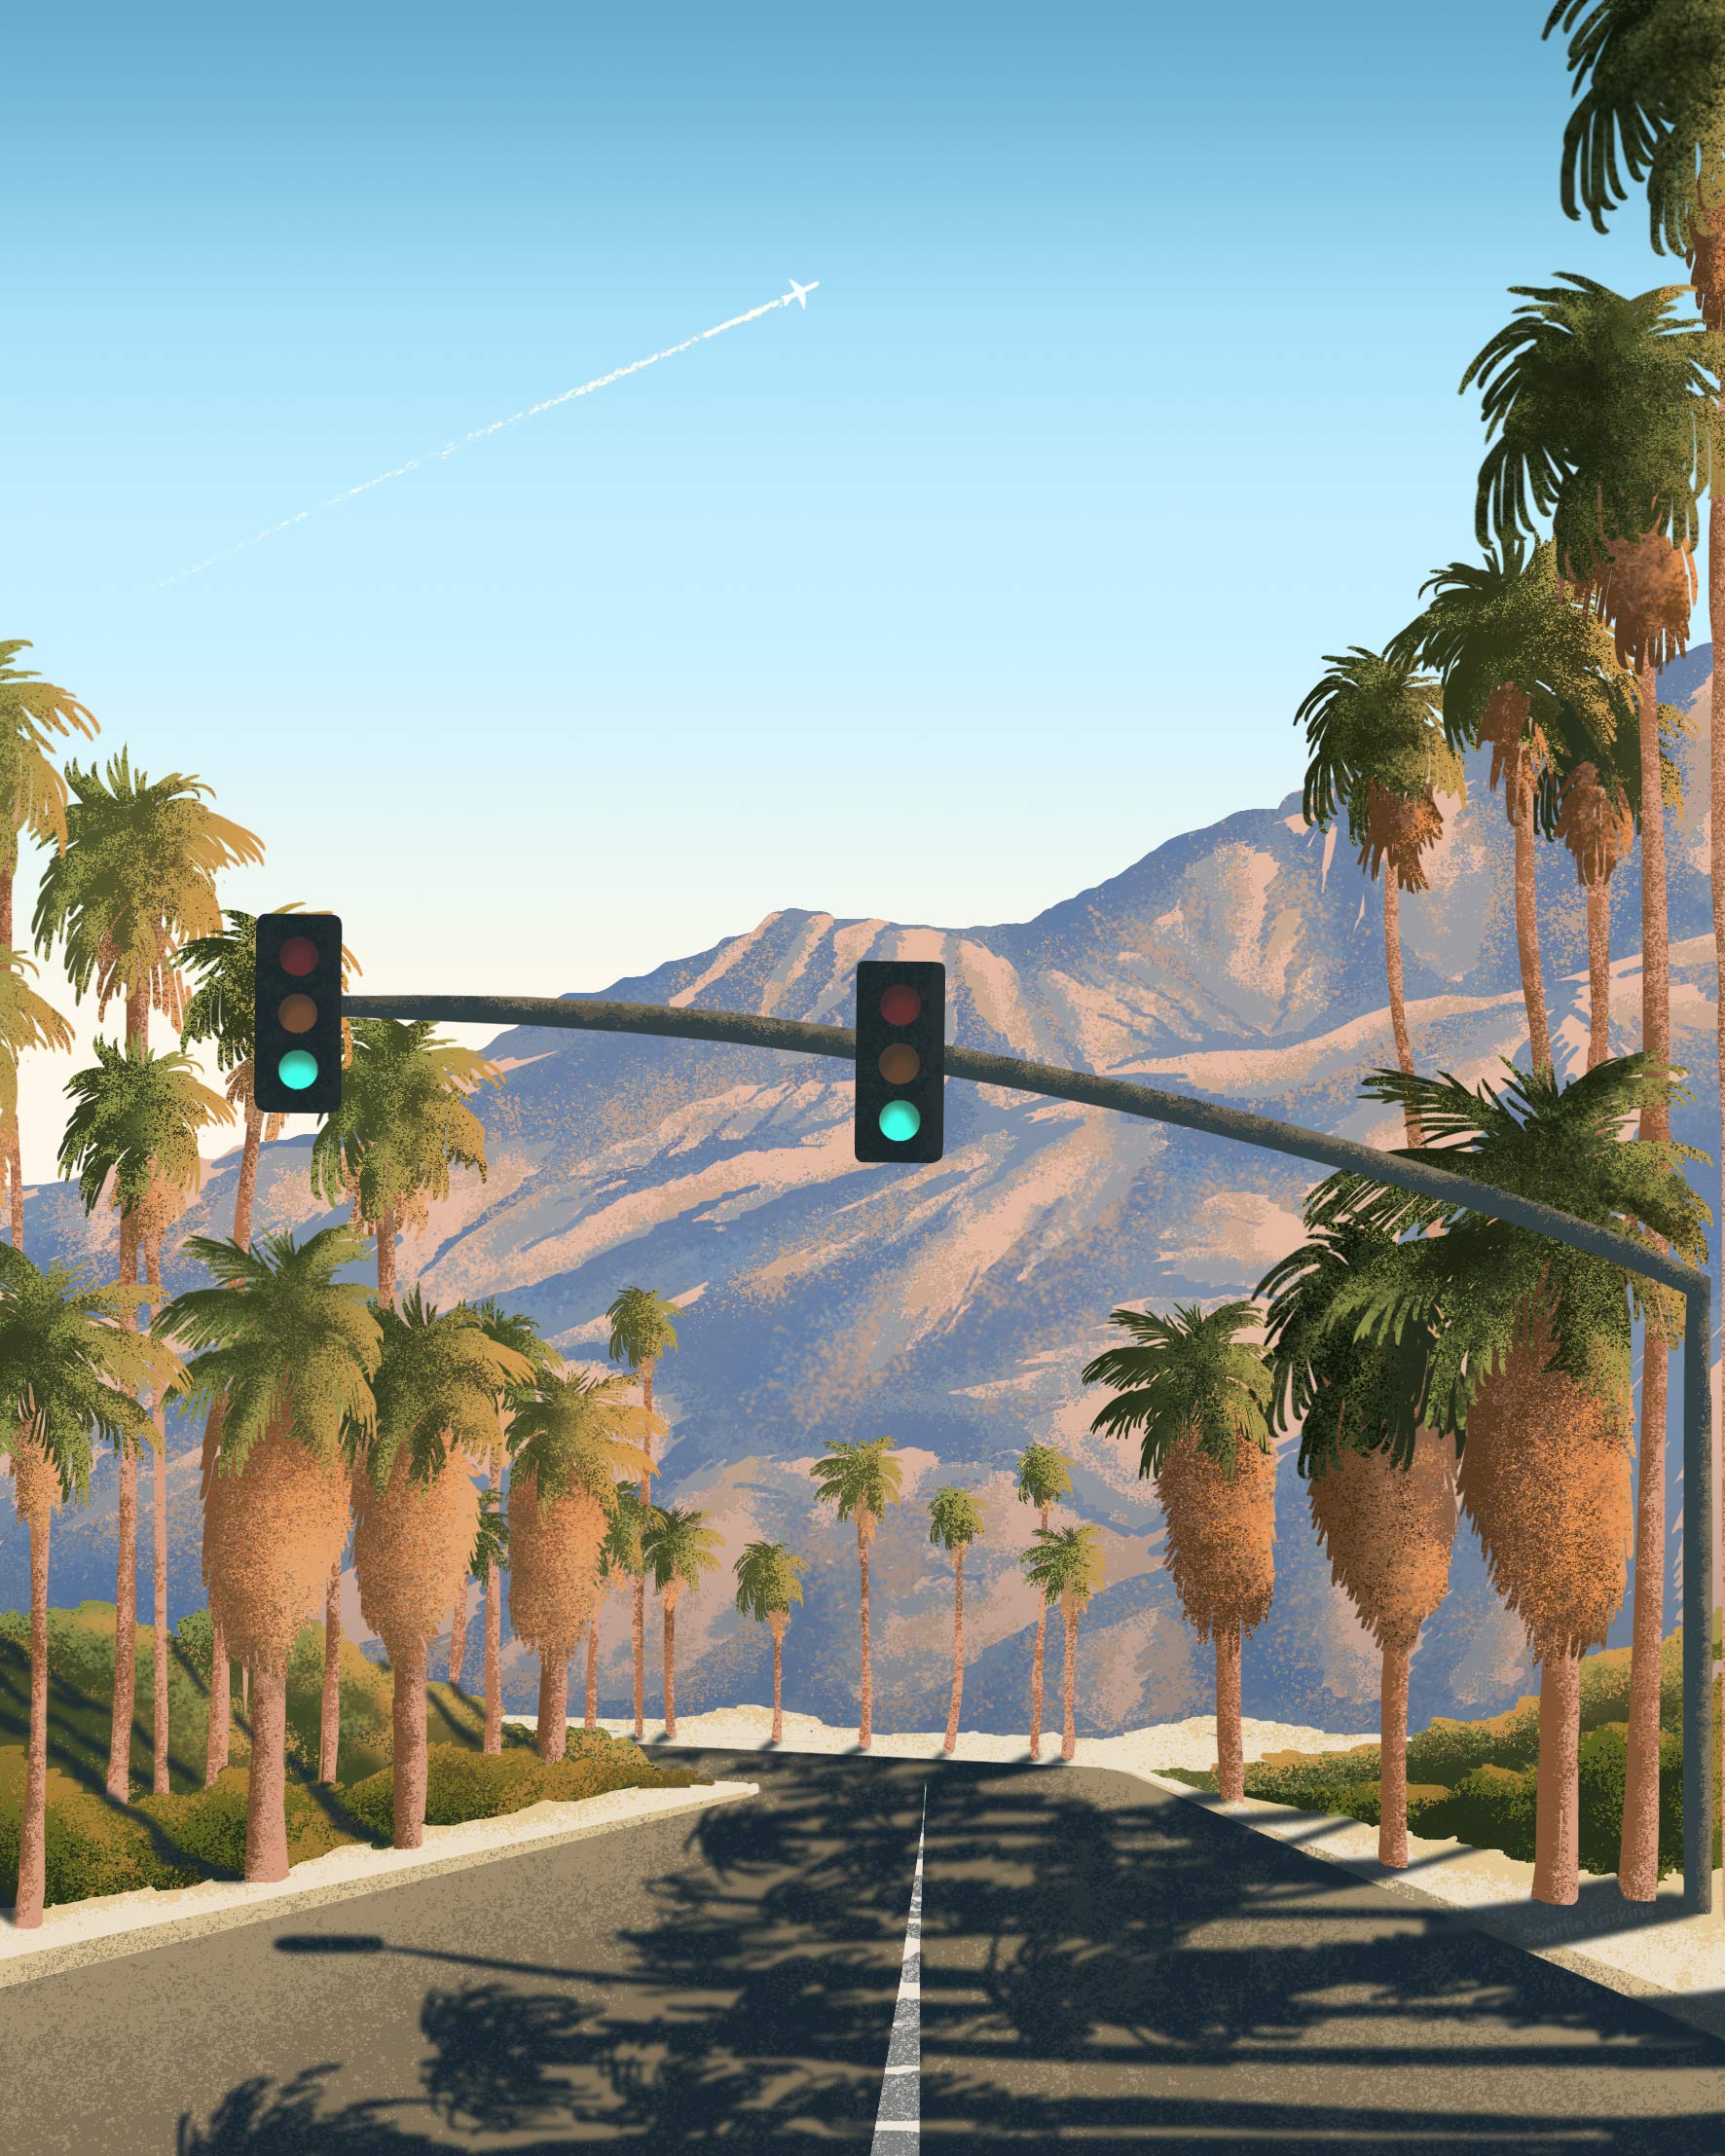 A palm tree-lined desert highway at golden hour, with green traffic lights hanging overhead and a mountain in the background 